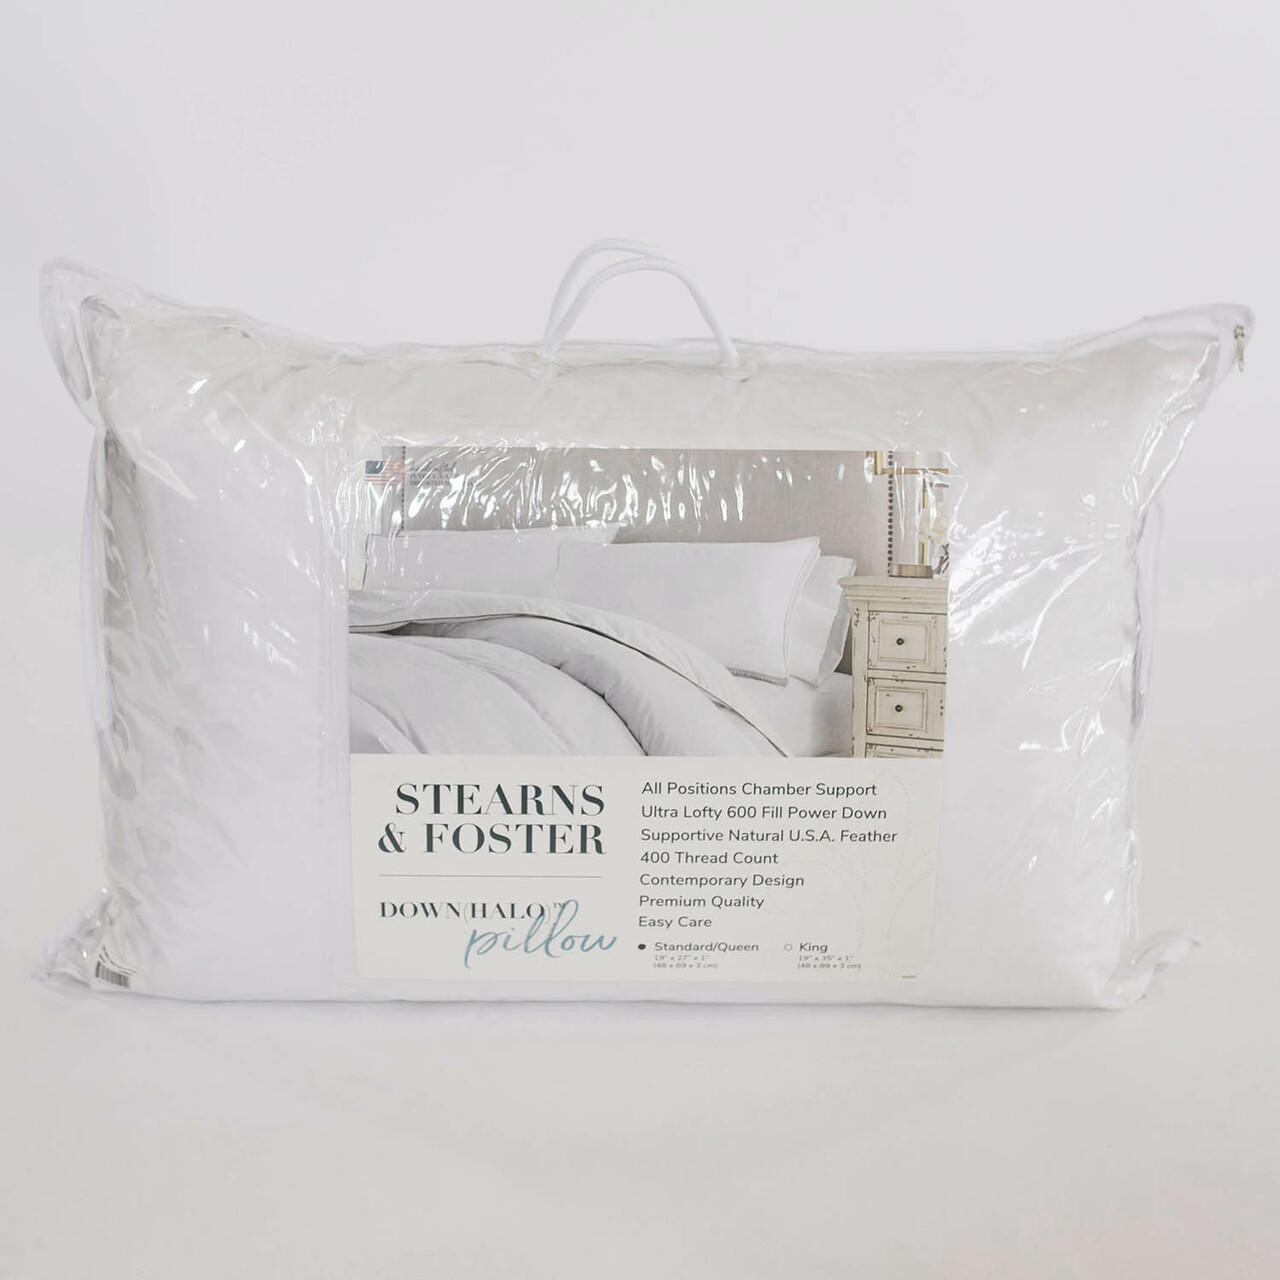 Featherlite Quill Free Feather Pillow